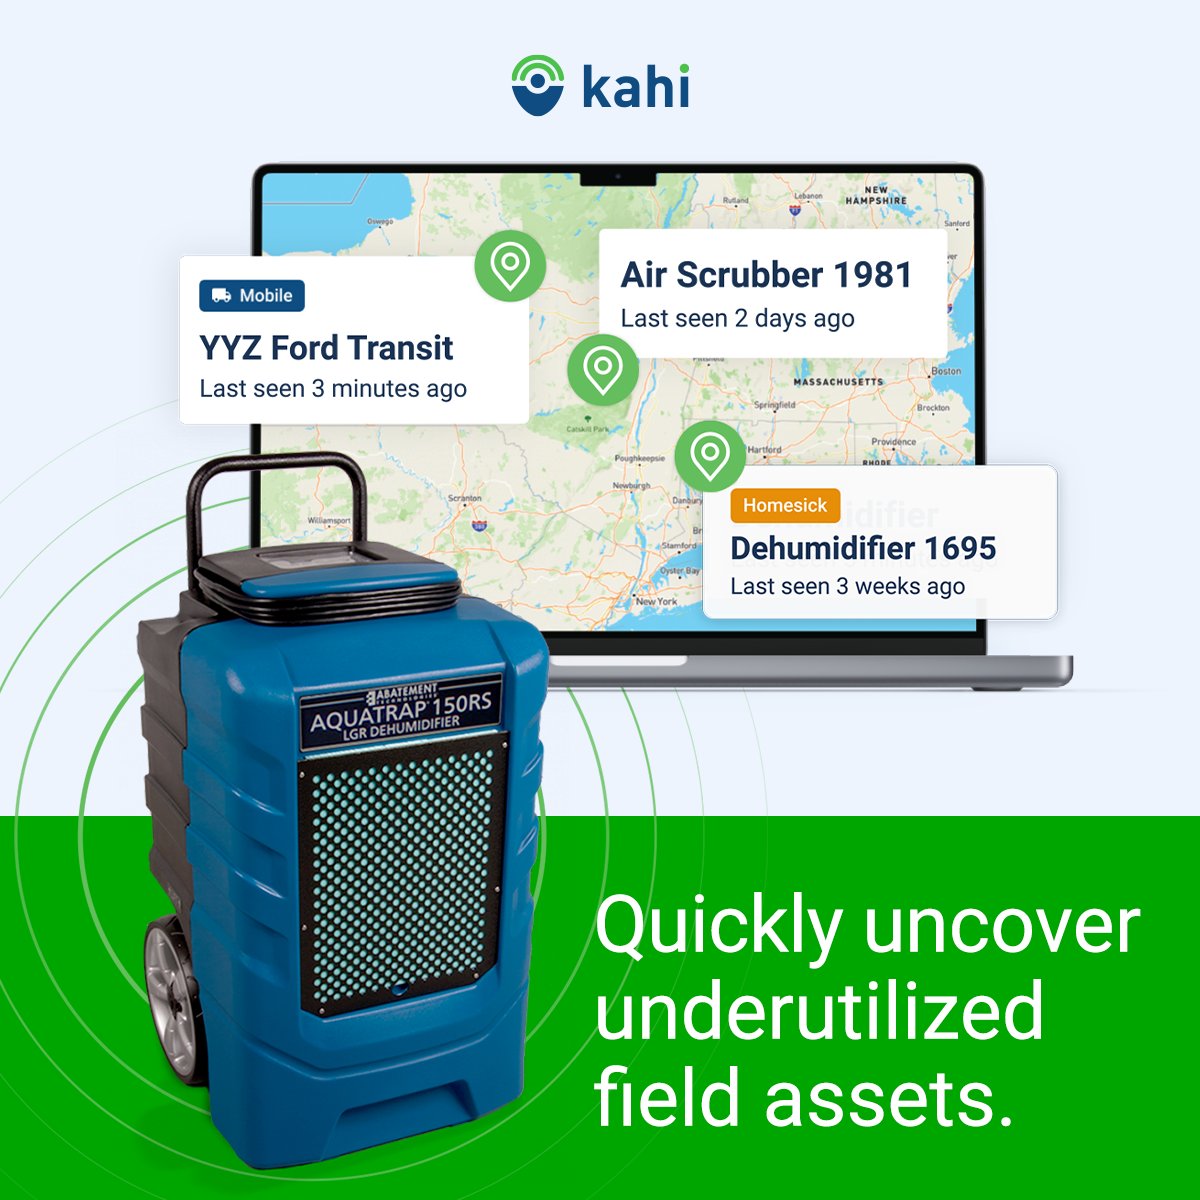 Kahi’s ‘Homesick’ feature means you never have to worry about letting an asset go underutilized or a resource being wasted. Rest easy knowing that Kahi is always there to watch over your valuable assets! 
#AssetTracking #EquipmentManagement